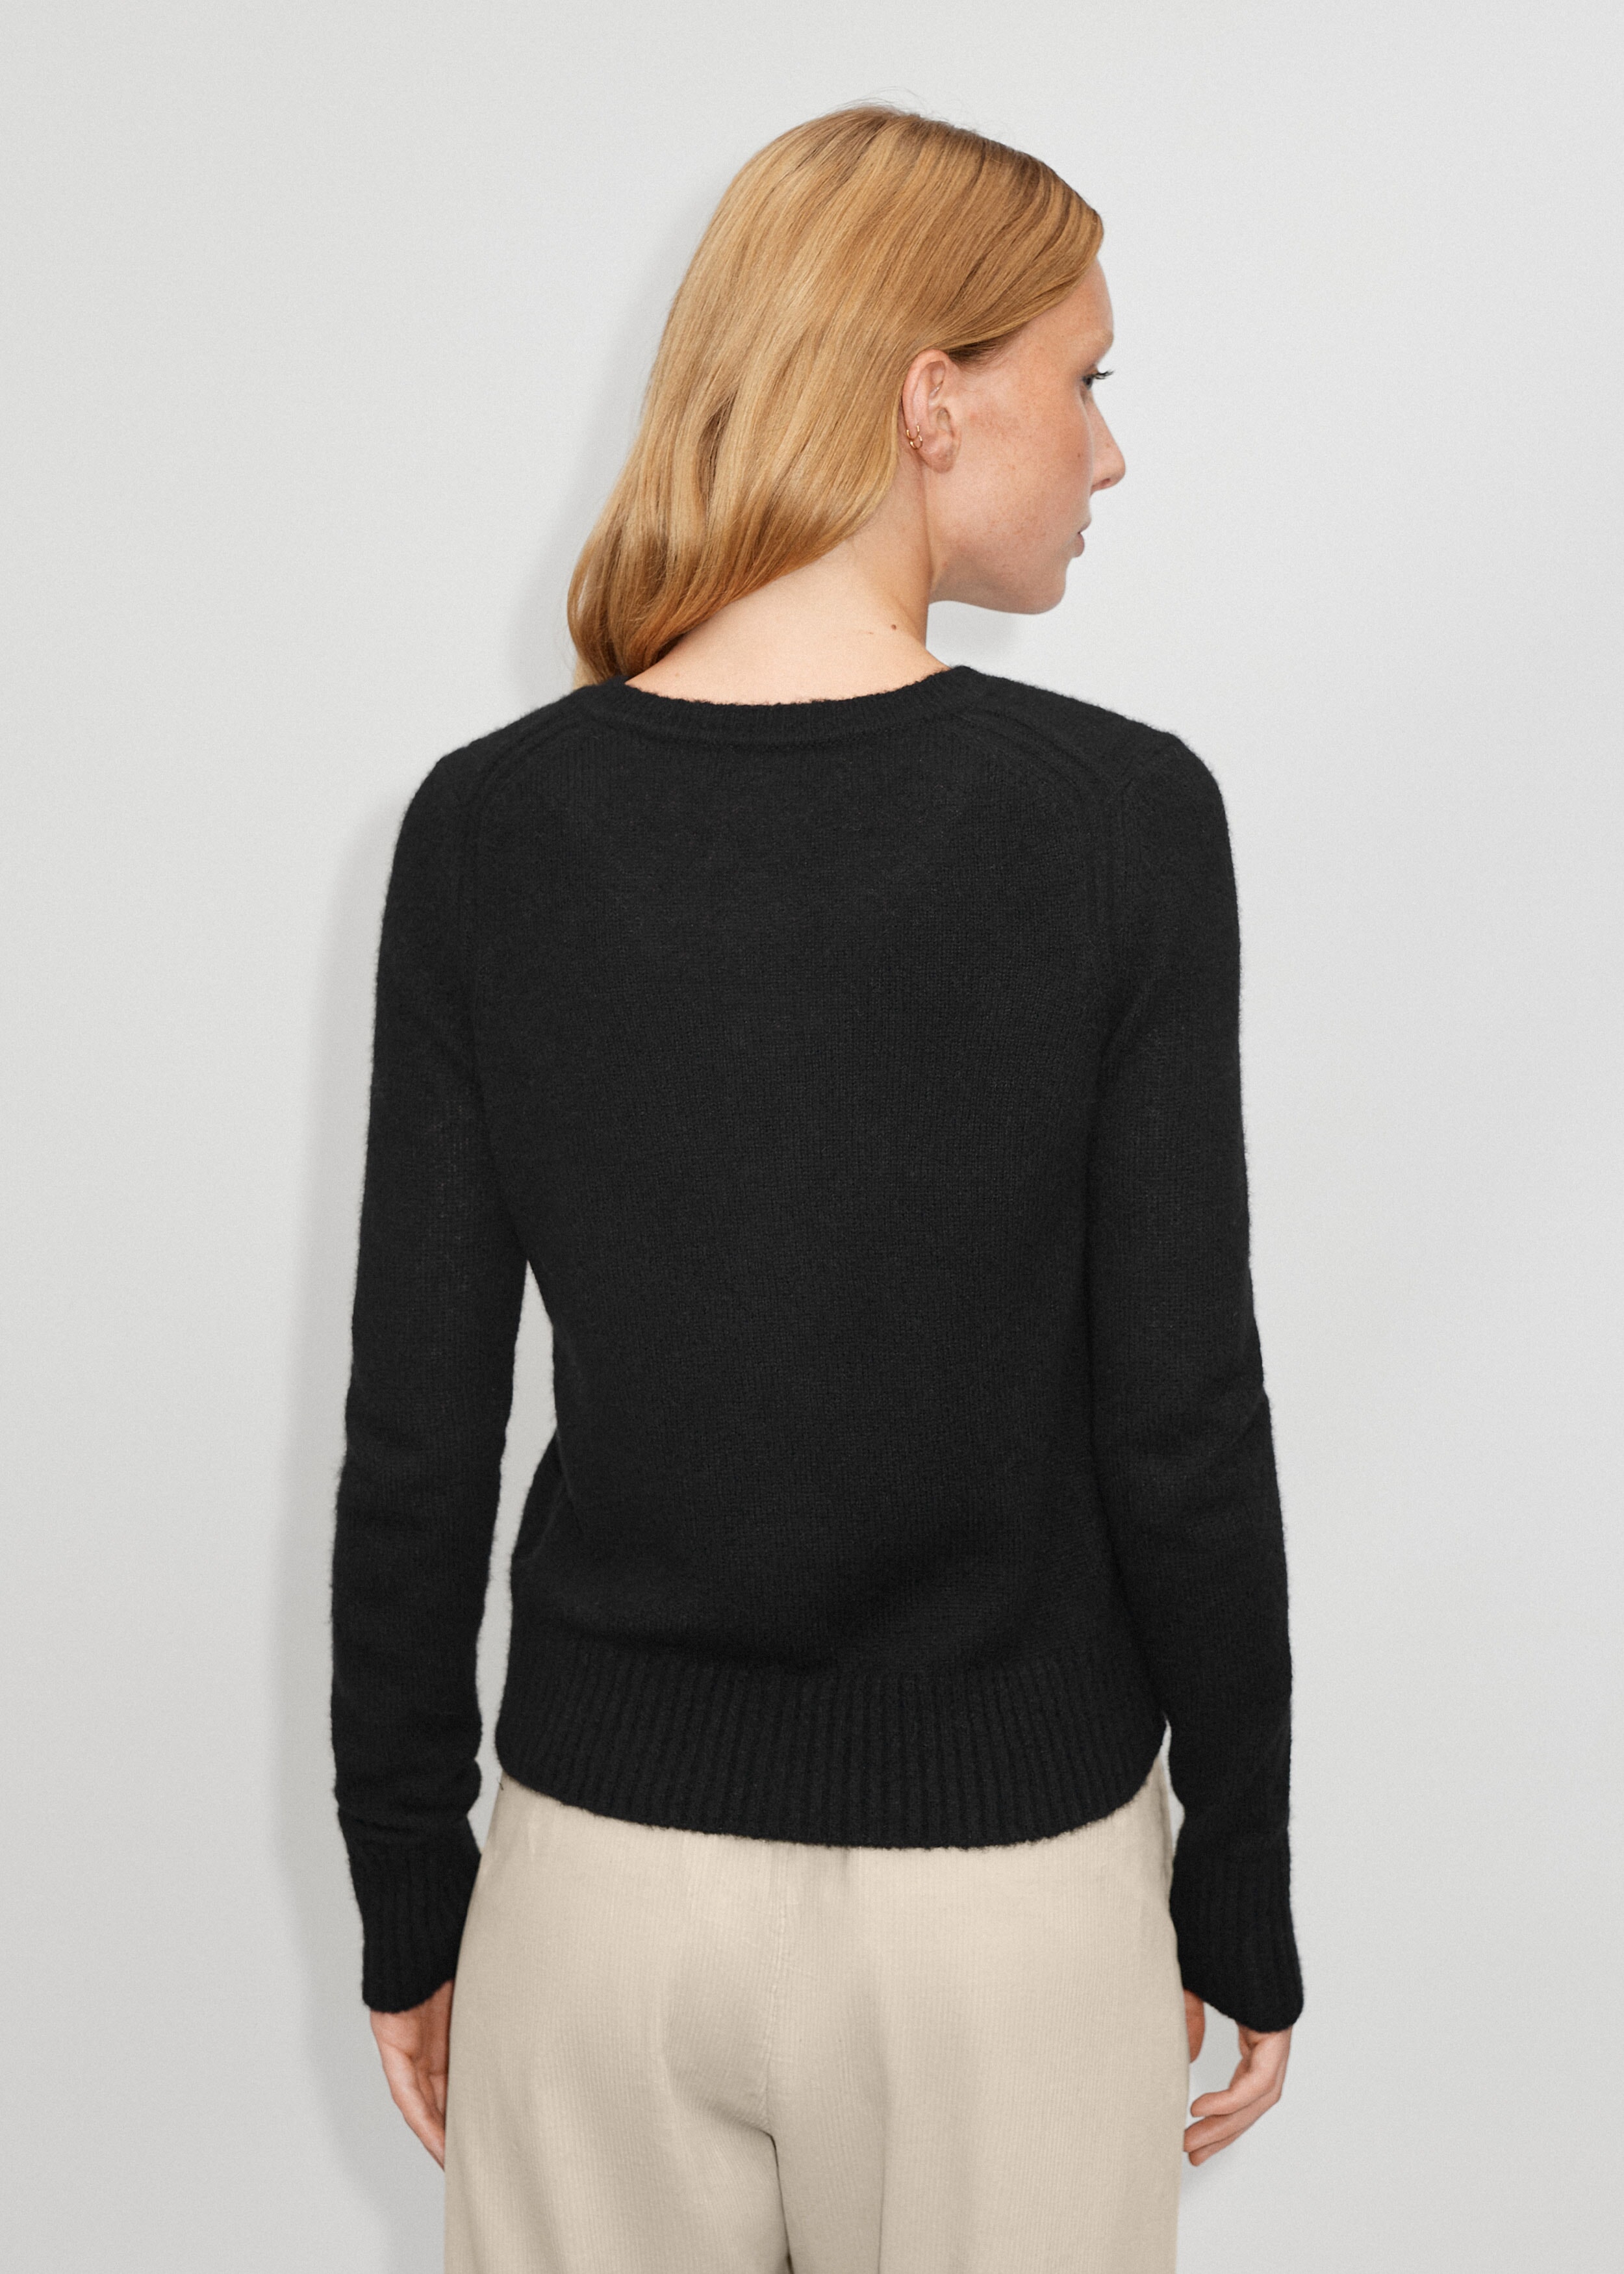 Cashmere Silk Barely There Cardigan Black